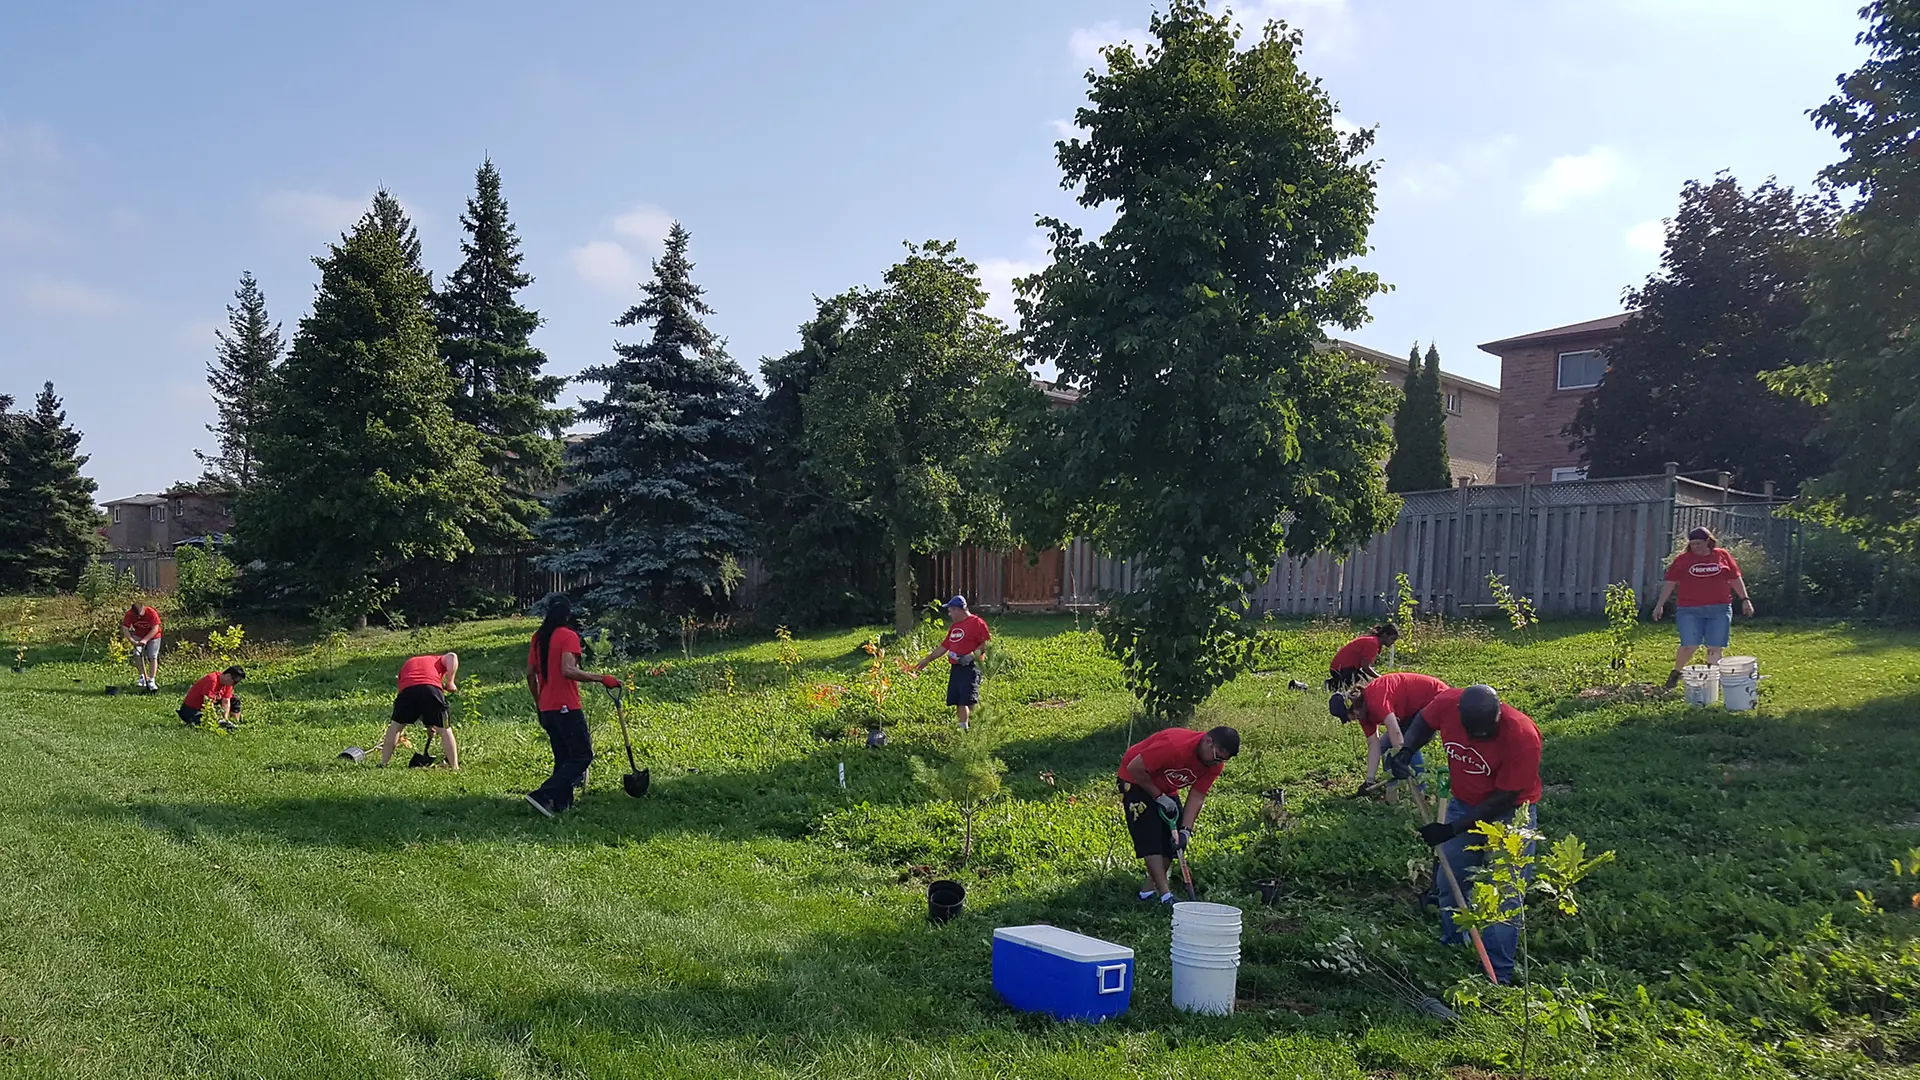 The Mississauga employees have planted over 200 trees in surrounding local parks, in support of One Million Trees Mississauga, an organization dedicated to planting one million trees by 2023.